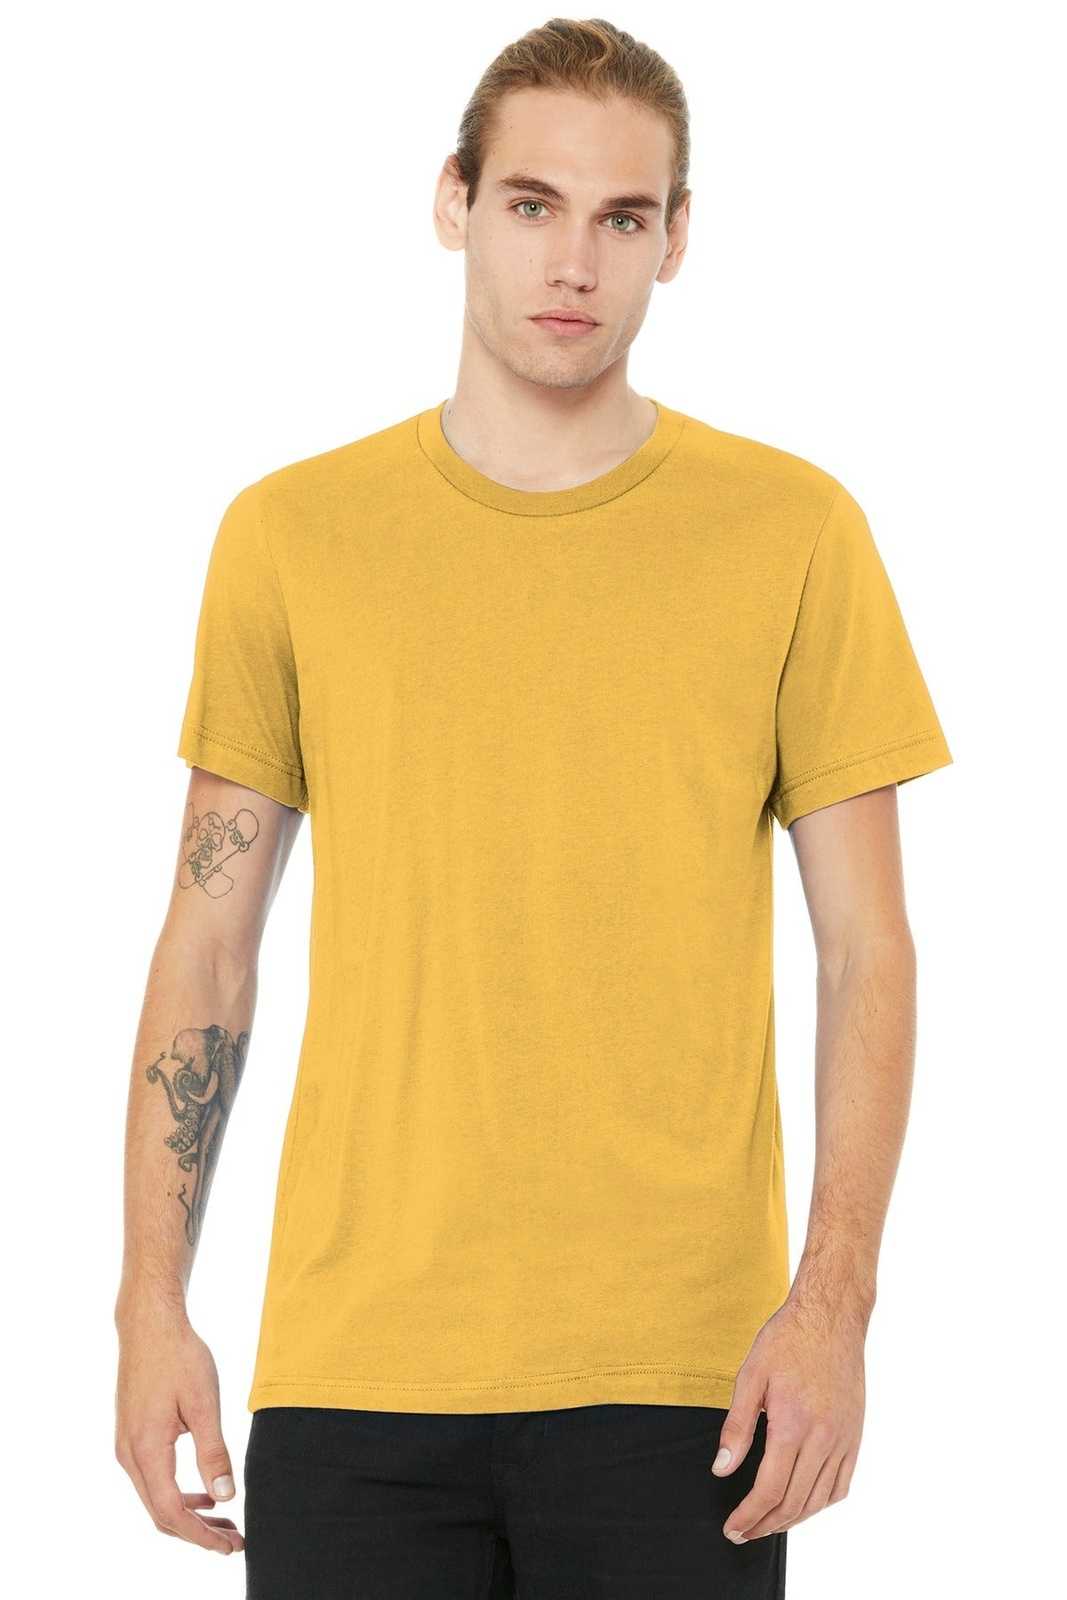 Bella + Canvas 3001 Unisex Jersey Short Sleeve Tee - Maize Yellow - HIT a Double